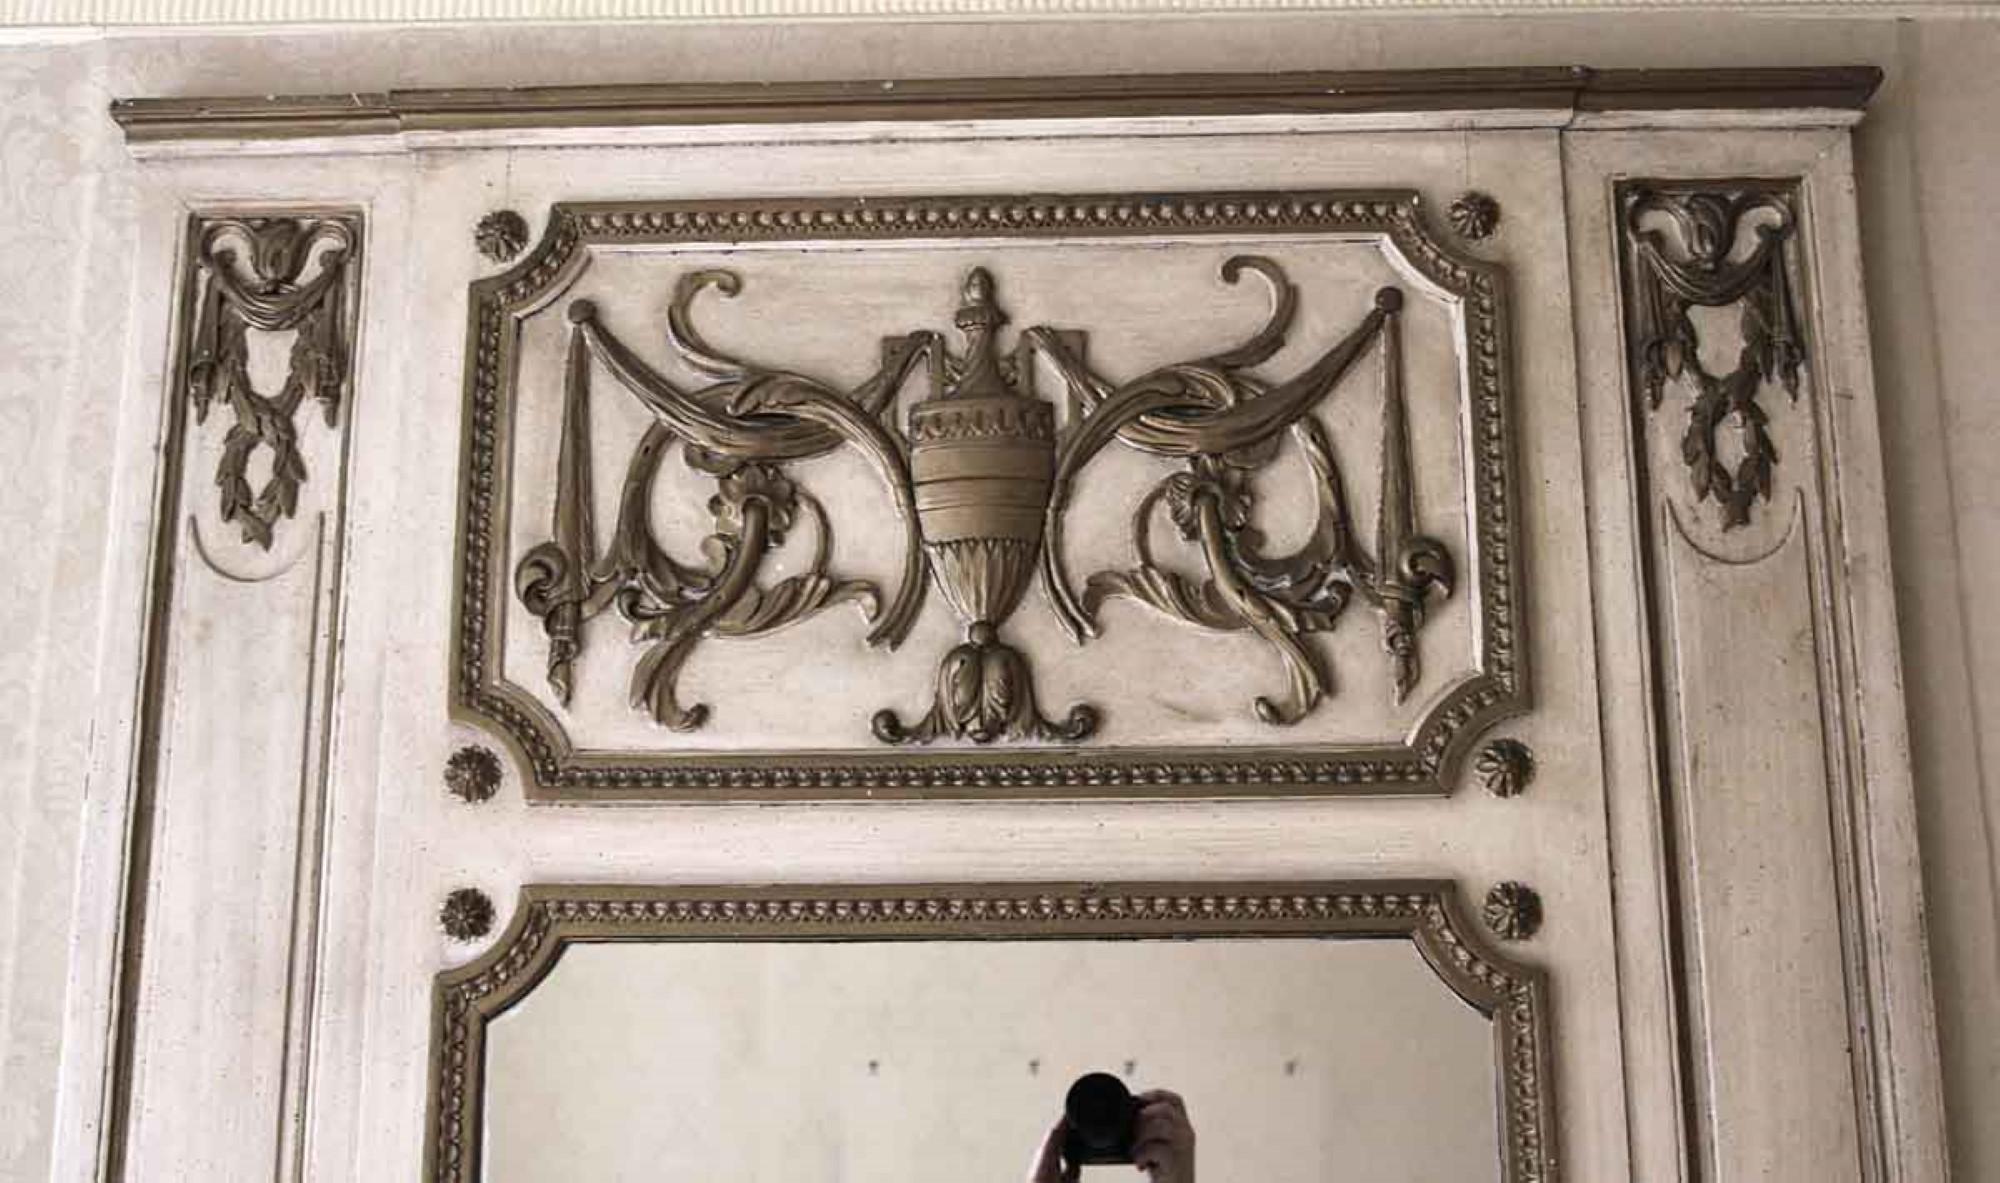 Tan wood over mantel mirror with hand carved details and an urn motif in the top center. Original to the 1931 NYC Waldorf Astoria Hotel suite 965. Mantel in photo is no longer available. Waldorf Astoria authenticity card included with your purchase.